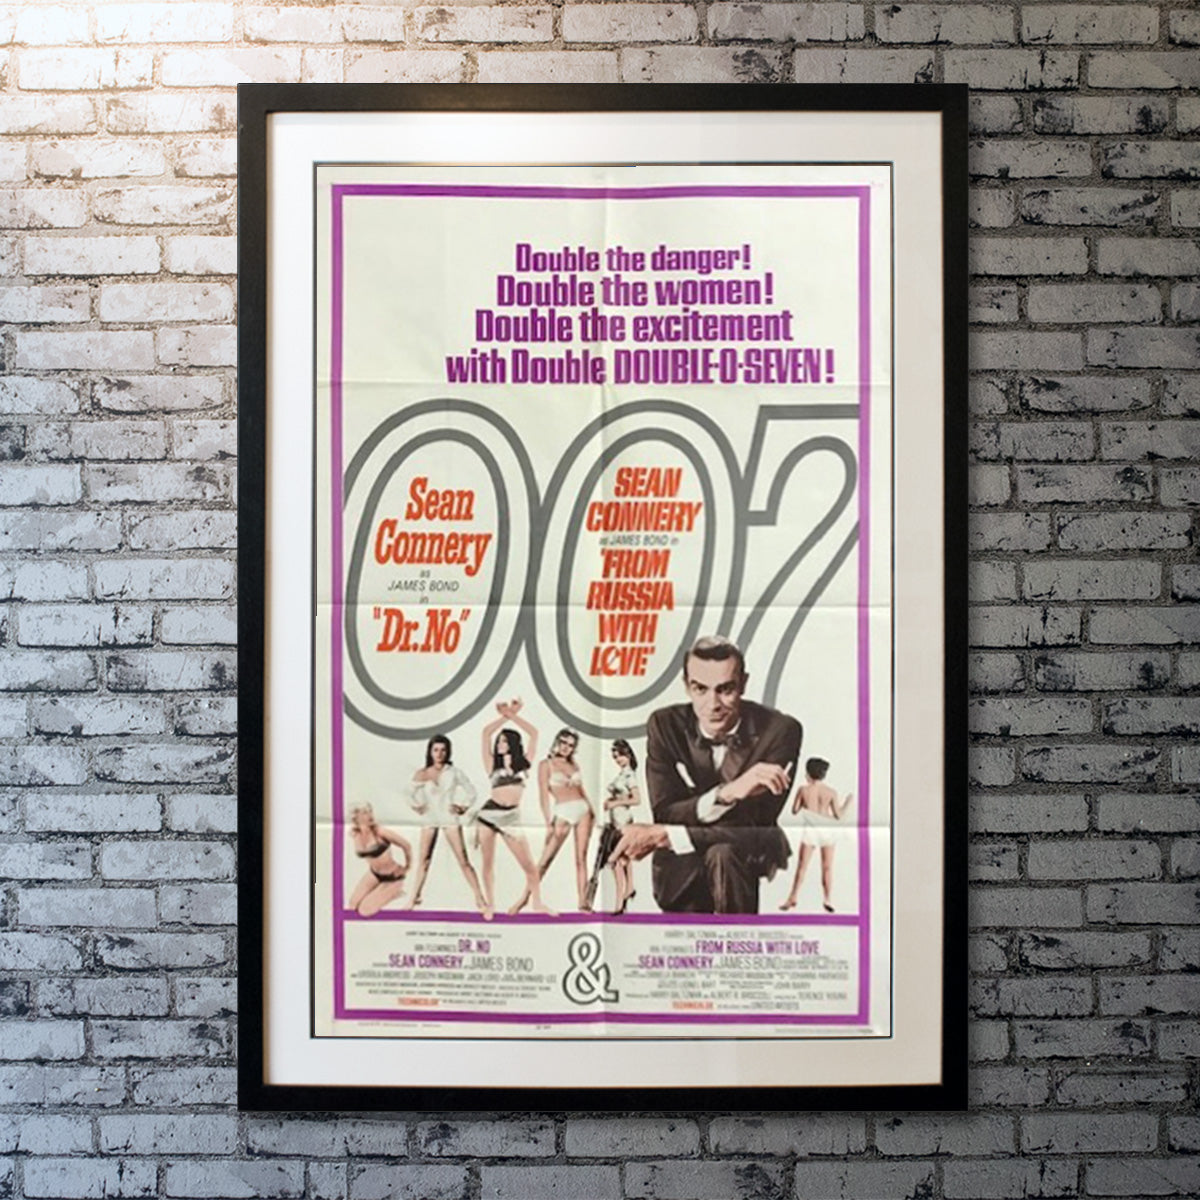 Original Movie Poster of Dr. No / From Russia With Love (1965)